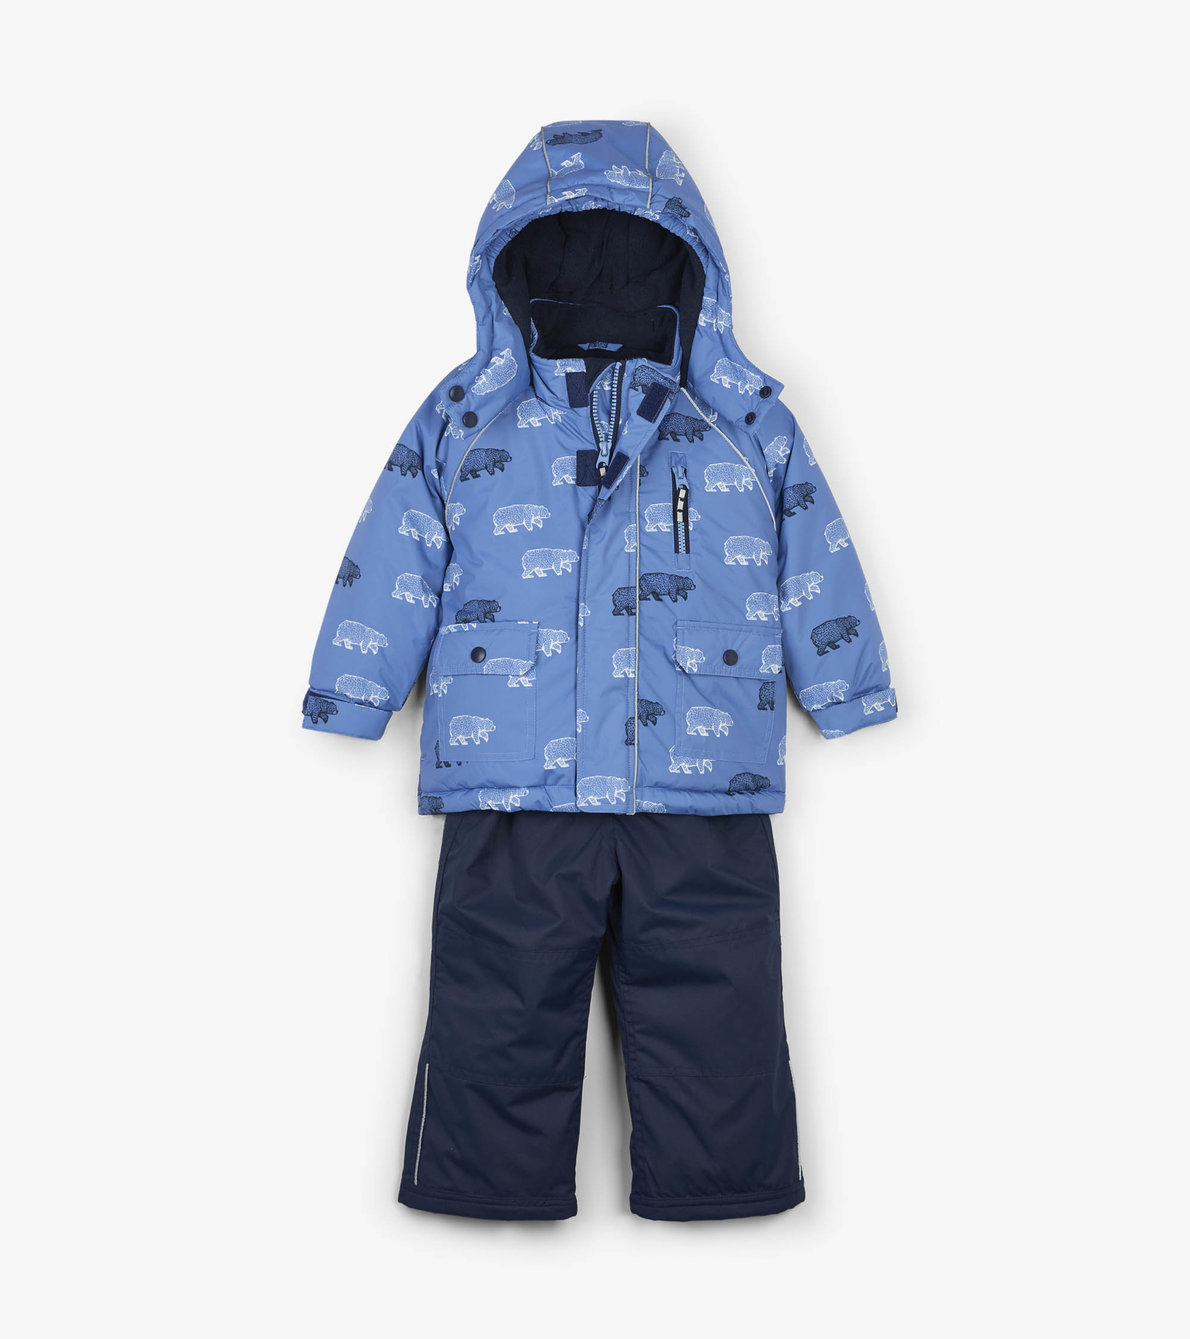 View larger image of Band of Bears Baby Snowsuit Set